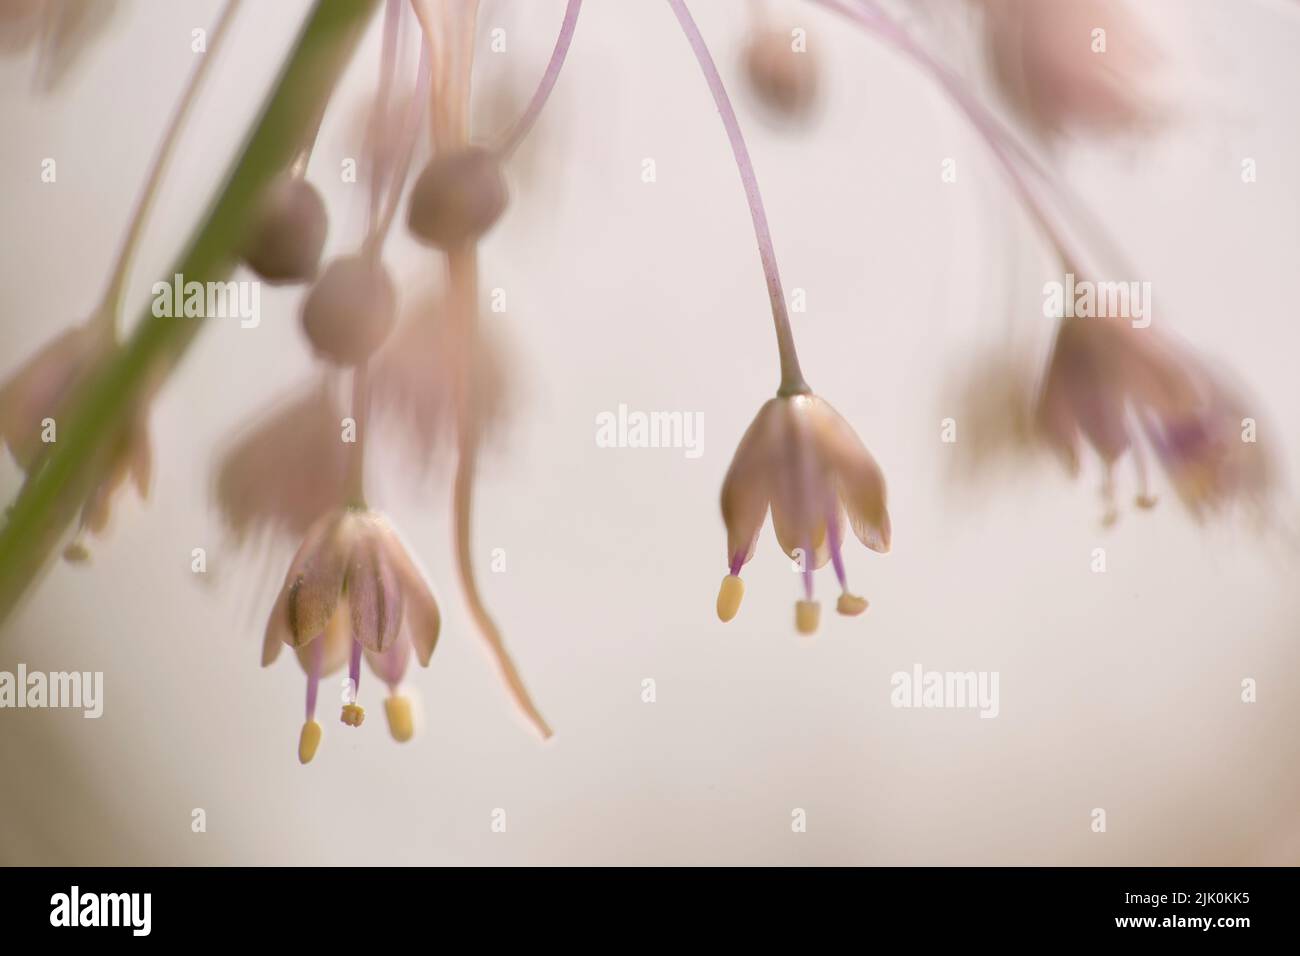 Allium daninianum is a species of onion found in Israel, Syria, Lebanon, Palestine and Jordan. It is a bulb-forming perennial with a long, flexuous sc Stock Photo